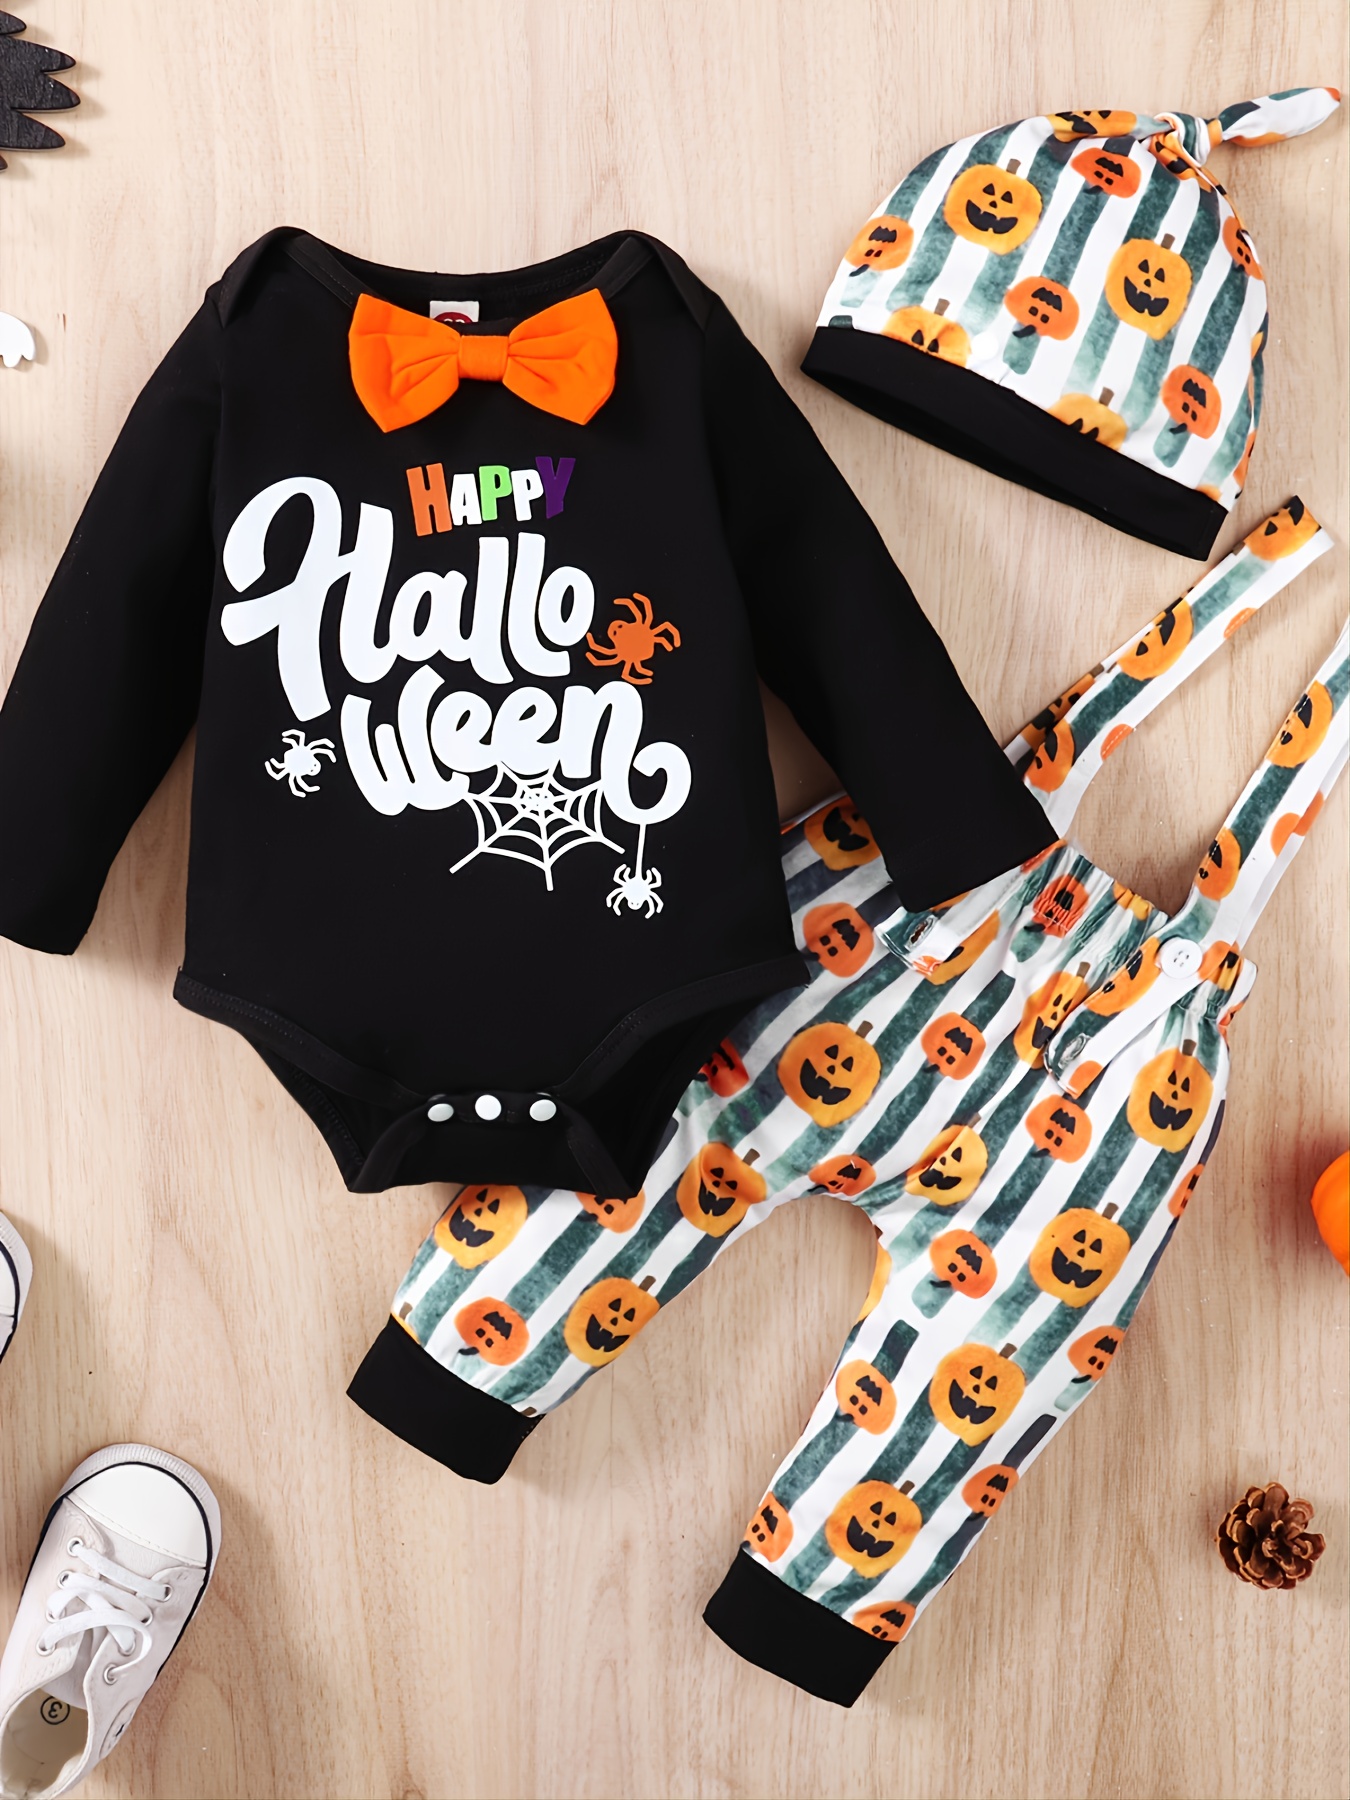 Toddler Baby Boys Halloween Outfit: Romper Tops, Pumpkin Pants and Overalls Hat